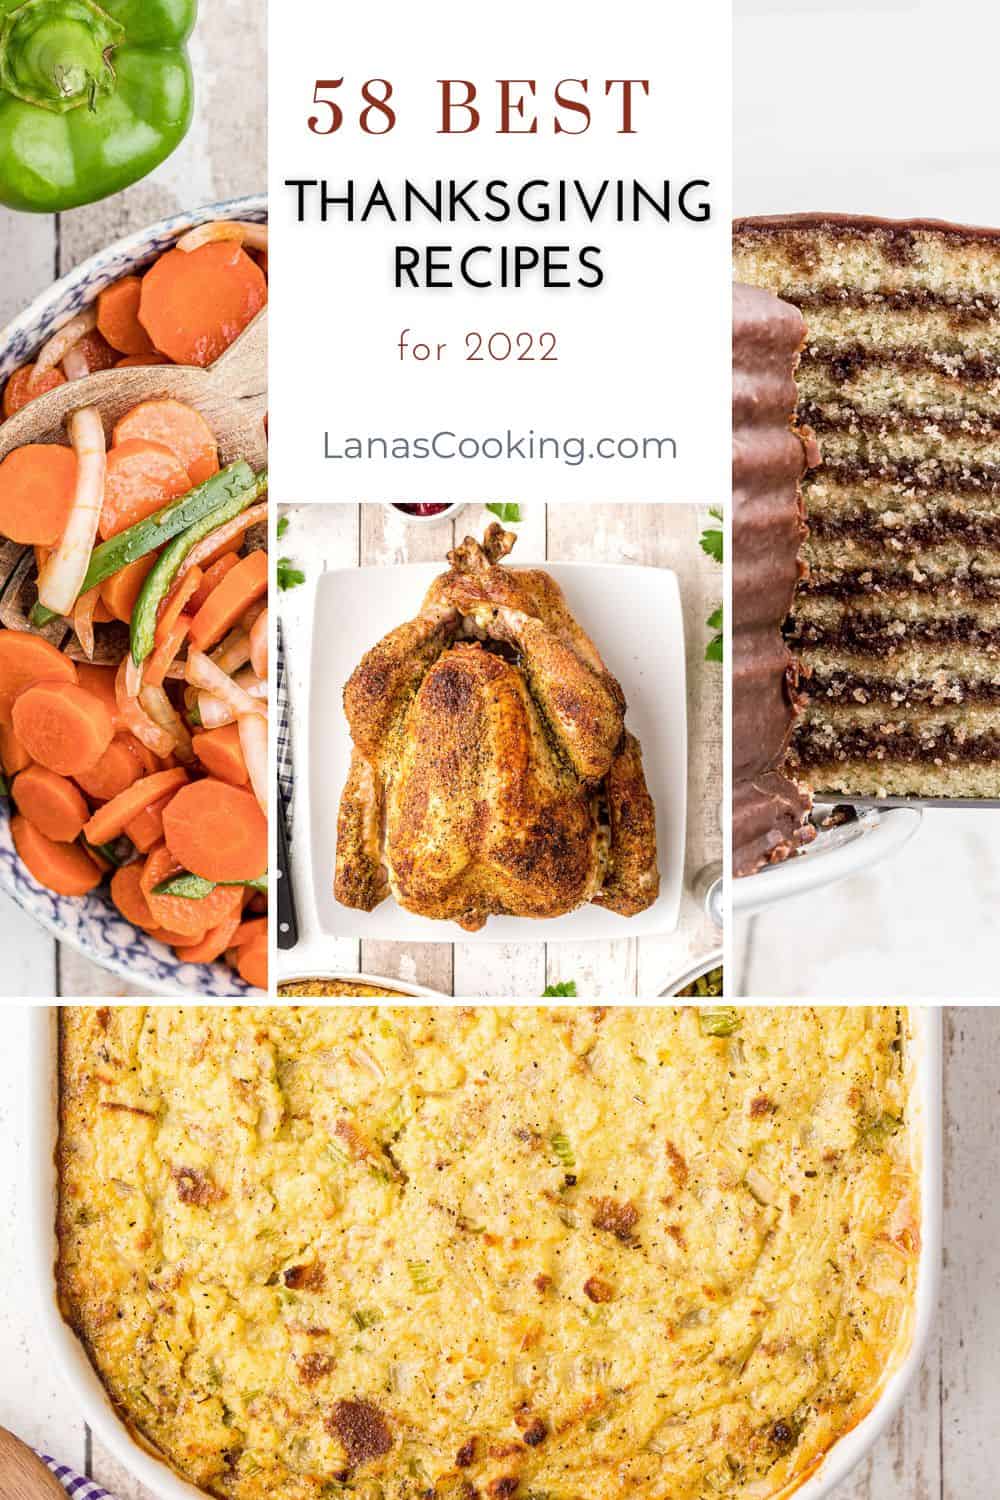 Collage of recipes from the post.